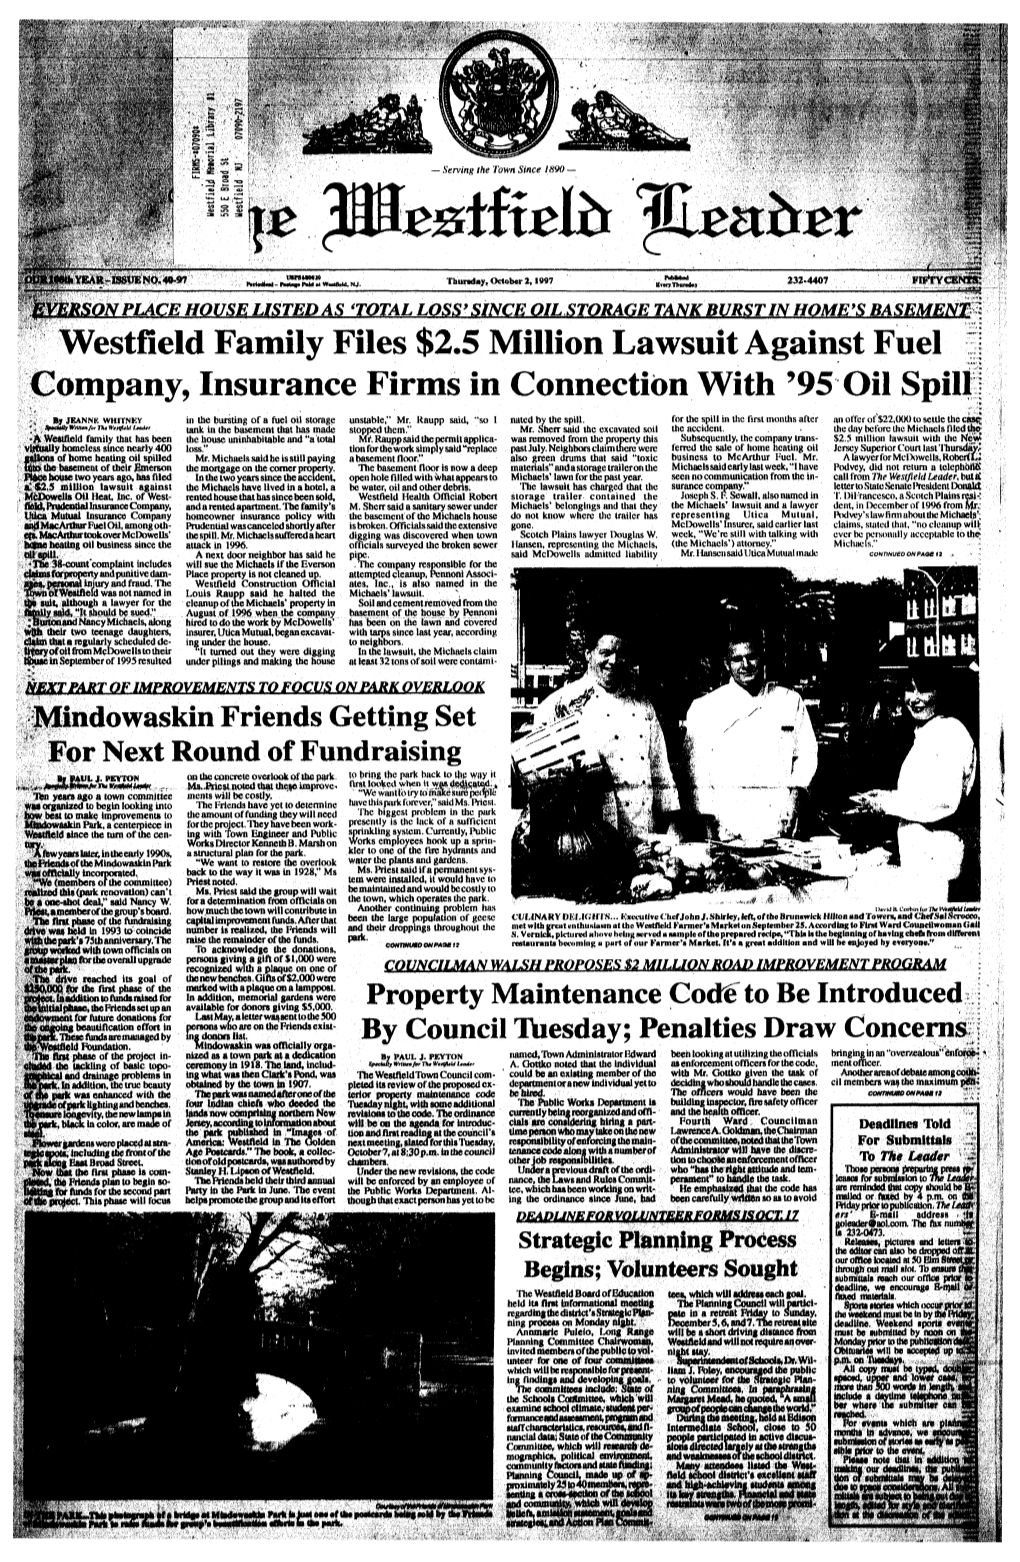 Westfield Family Files $2.5 Million Lawsuit Against Fuel •" Company, Insurance Firms in Connection with '95 Oil Spill